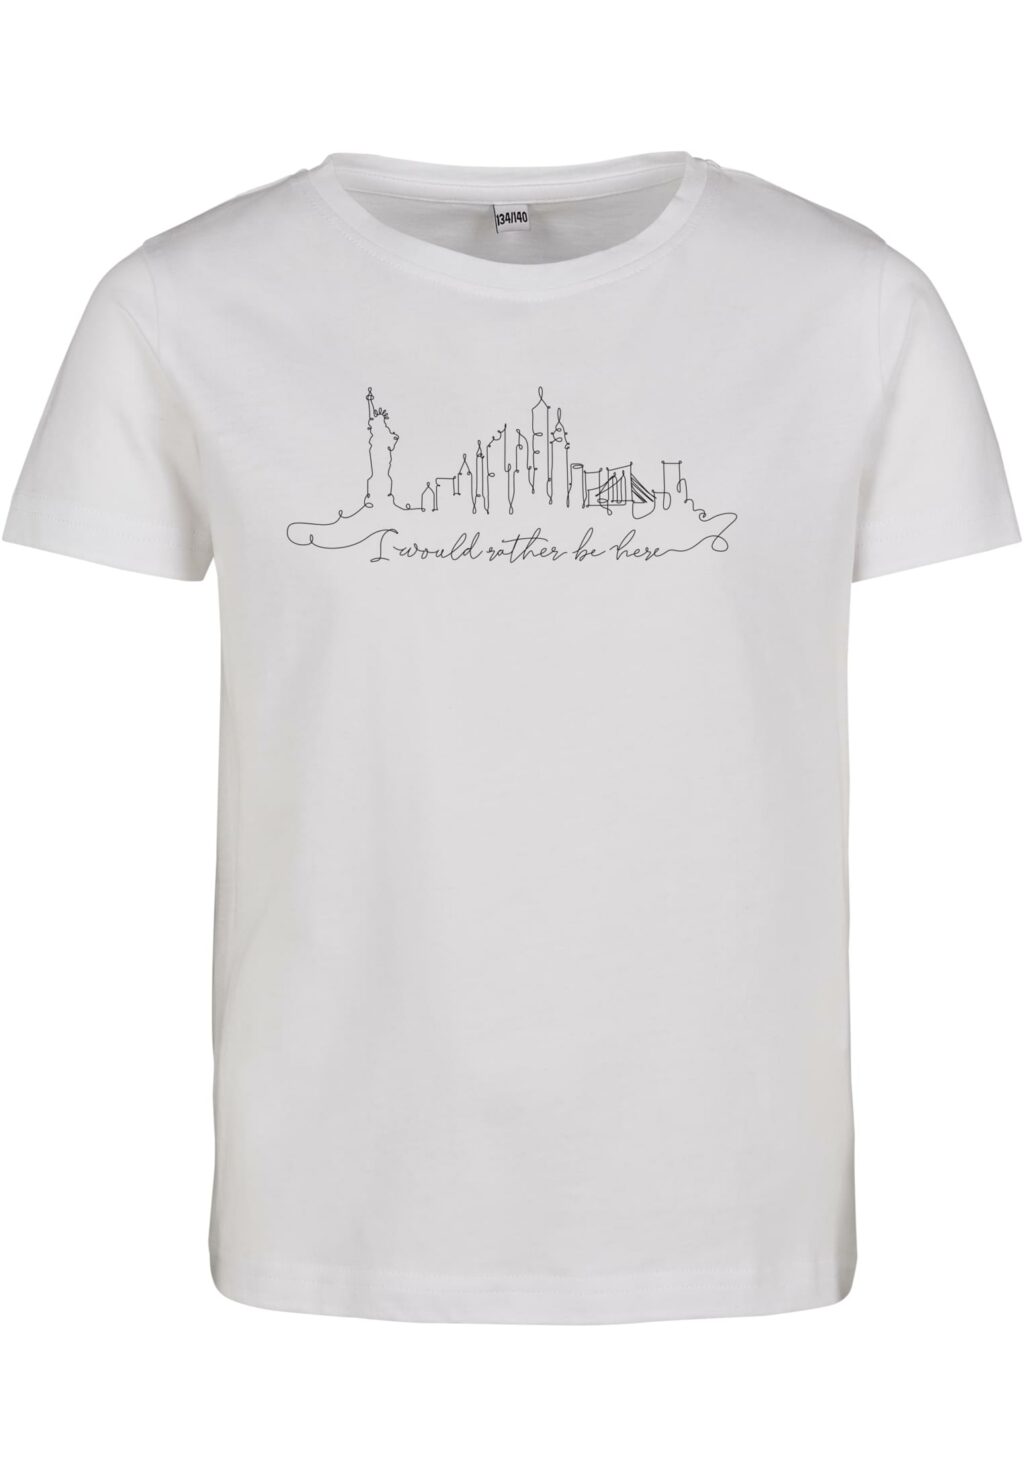 Kids Want To Be Here Tee white MTK177